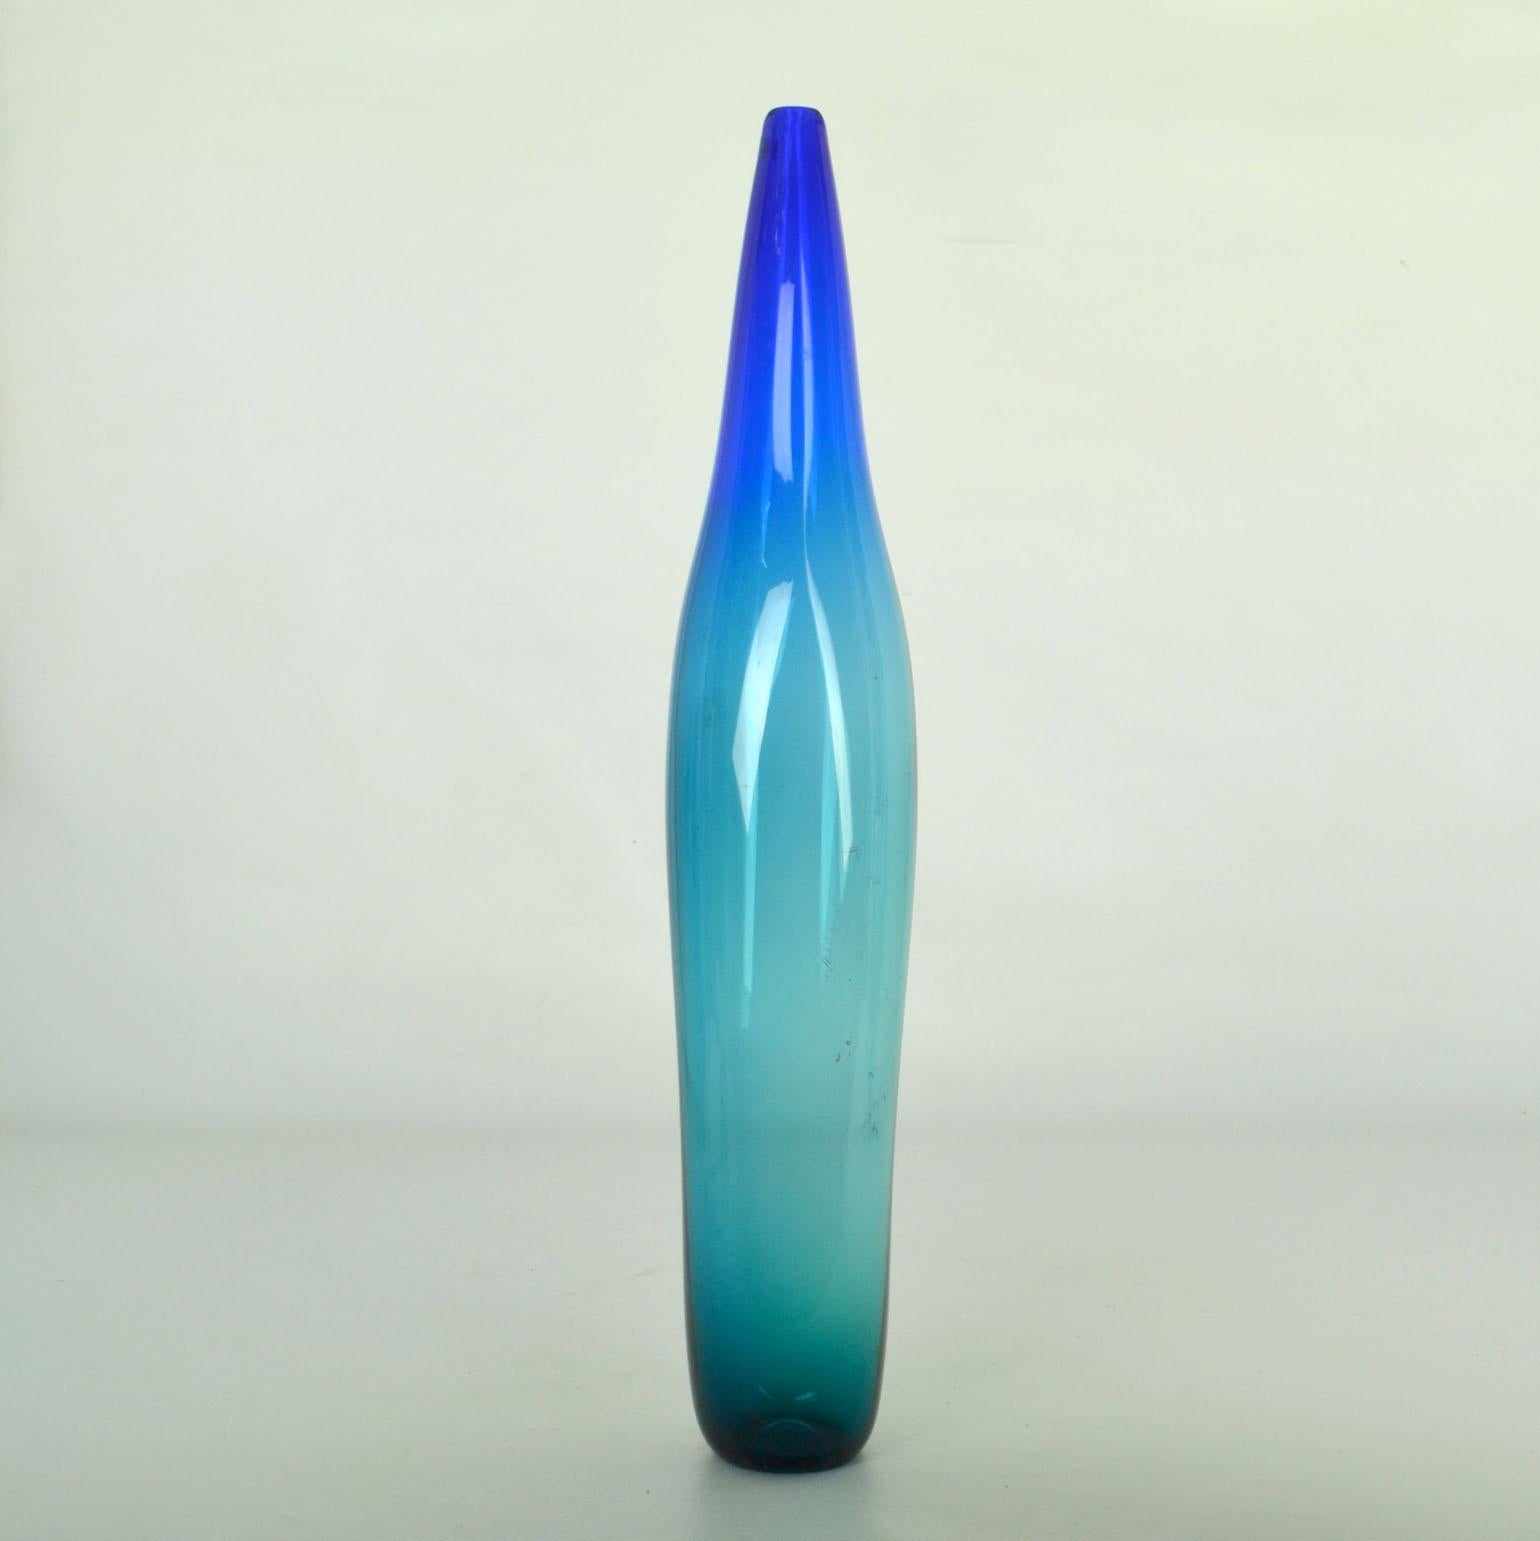 Set of two blue vases by Floris Meydam and Siem van de Marel is the designer at Leerdam glass works, The Netherlands. 
Tall art vase with over flowing colours two colored vase, designed by Floris Meydam for Glass Factory Leerdam, 1960's.
Glass